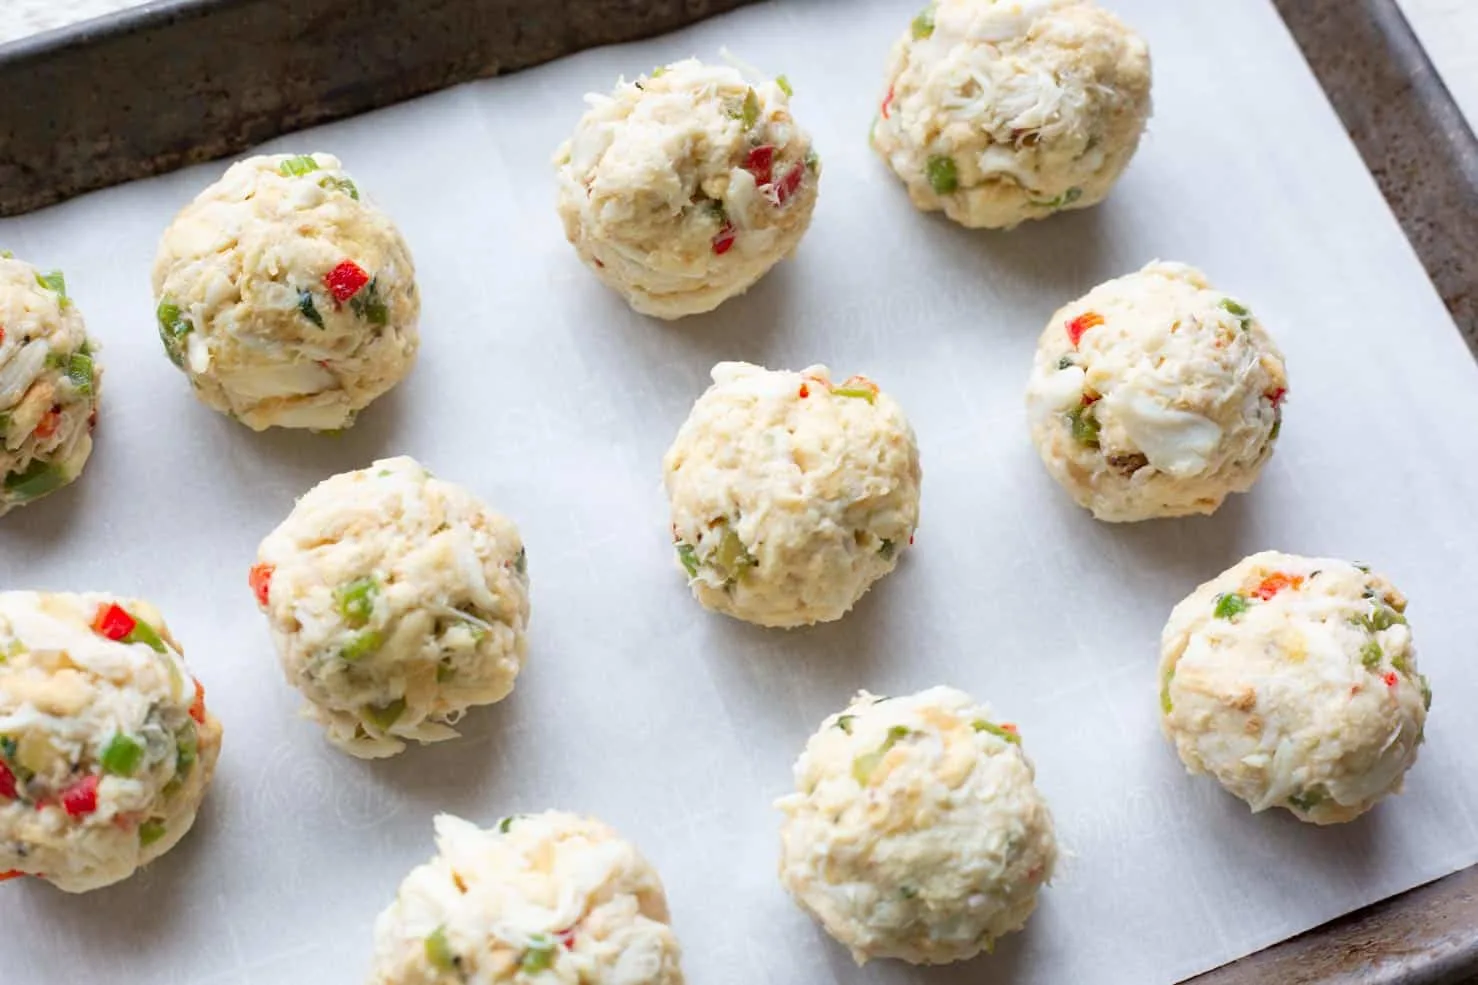 Rolled crab balls on a baking sheet before breading.